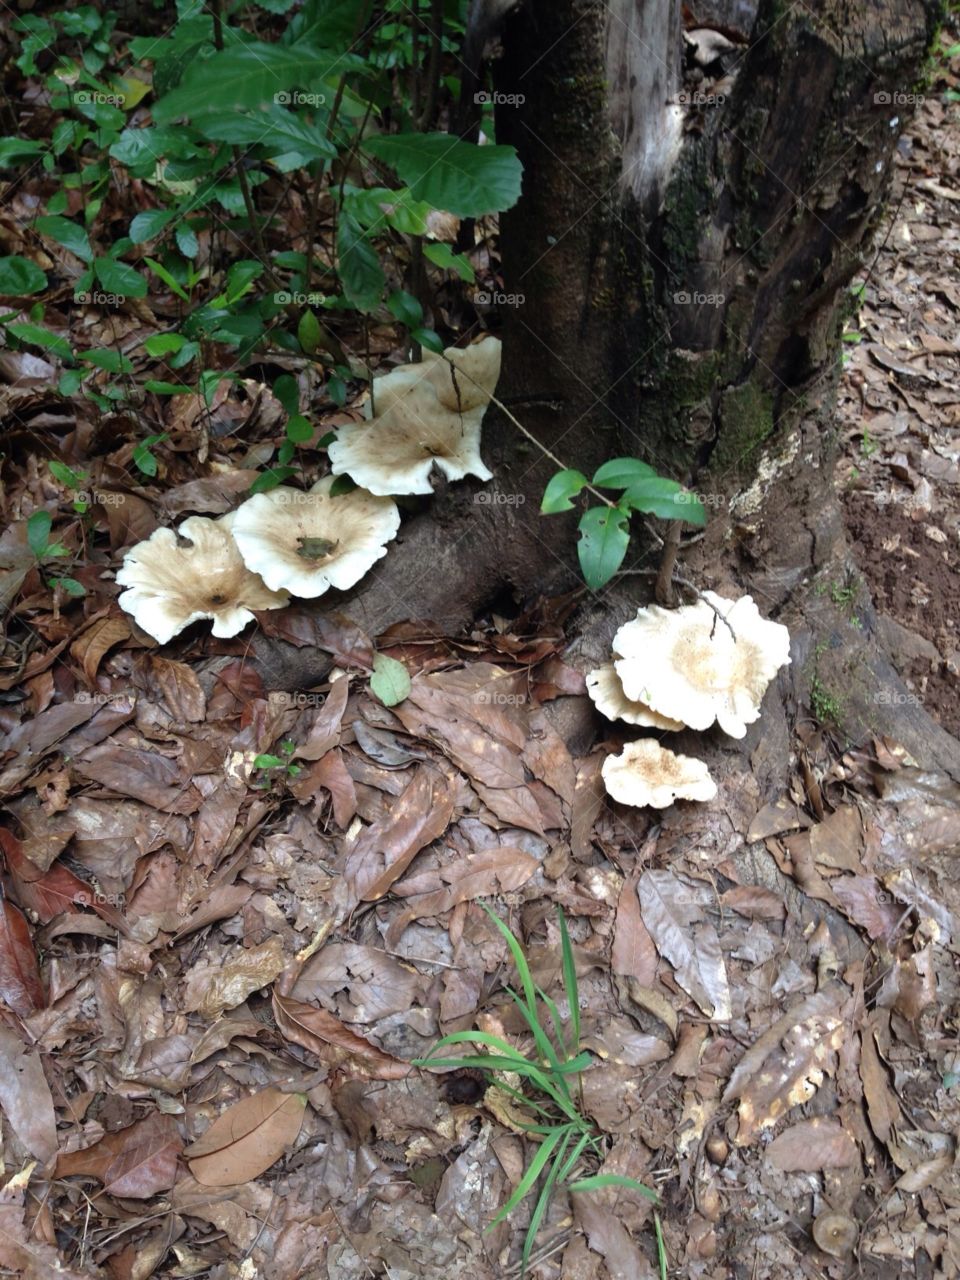 Mushrooms in the forest 